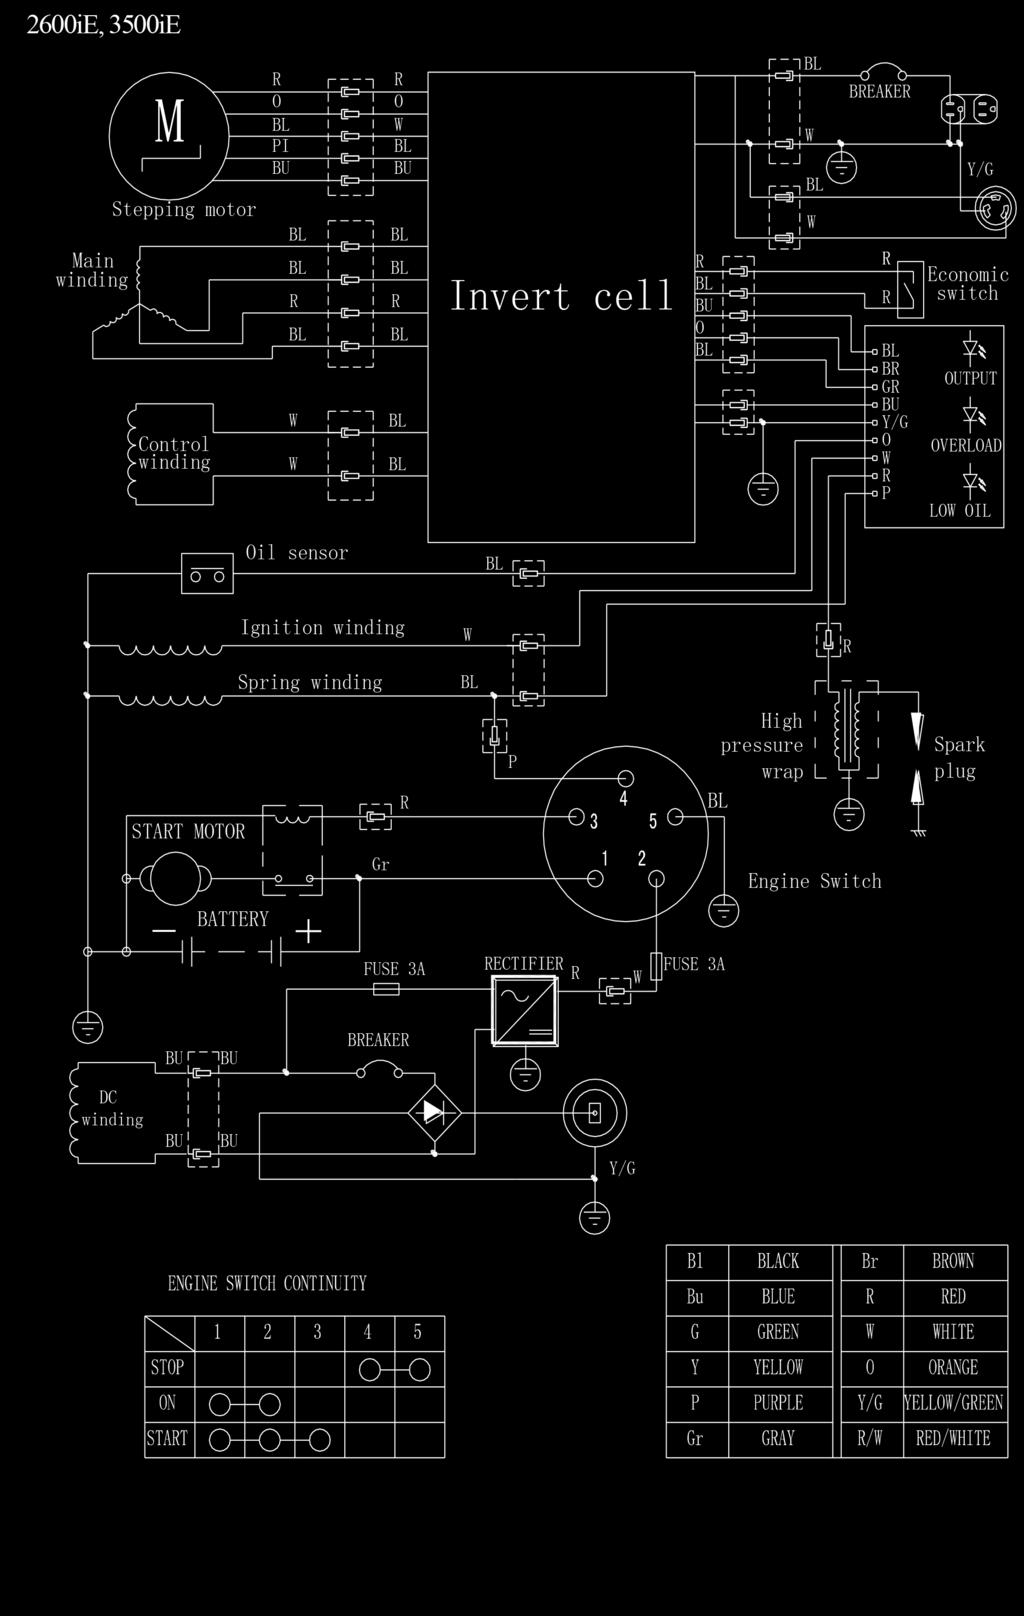 WIRING DIAGRAM 2600i M R R 0 0 W PI BU W BREAKER Y/G Main winding Stepping motor Control winding R W W R Invert cell R BU 0 W R R GR BU Y/G O W R P Economic switch OUTPUT OVERLOAD LOW OIL